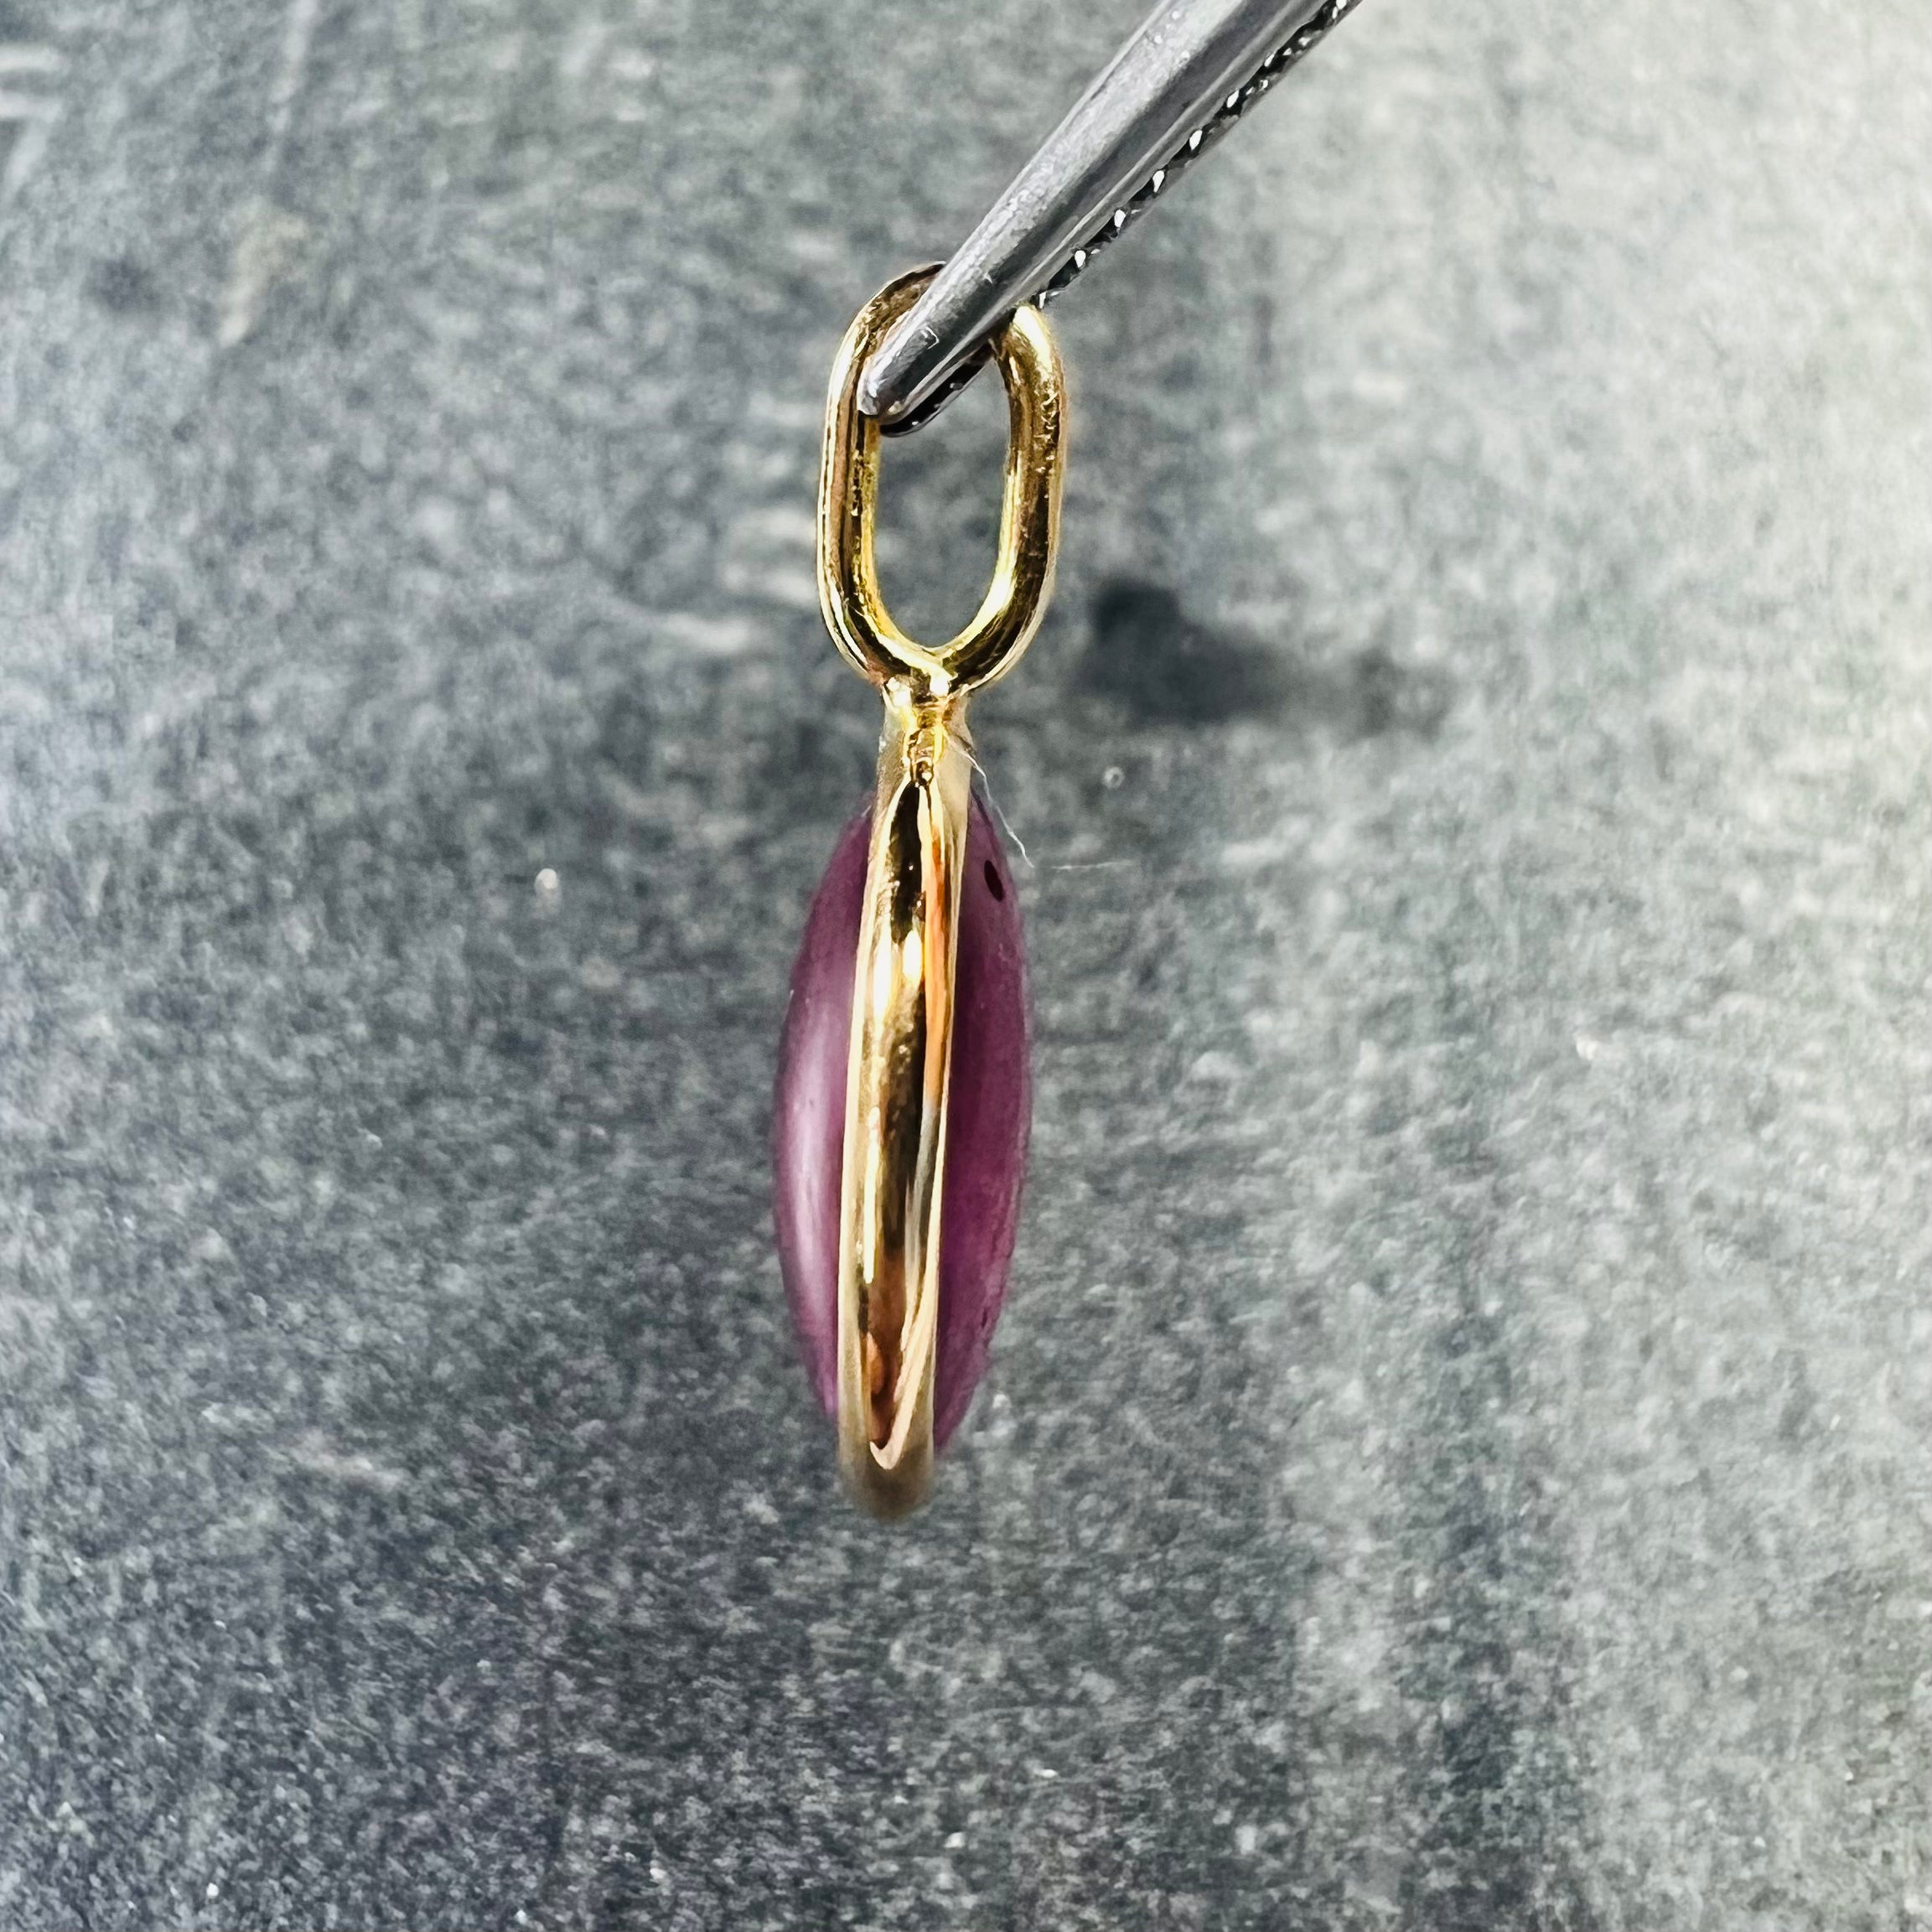 5CT Cabochon Pink Tourmaline in 18K Yellow Gold Charm Pendant 18x11mm